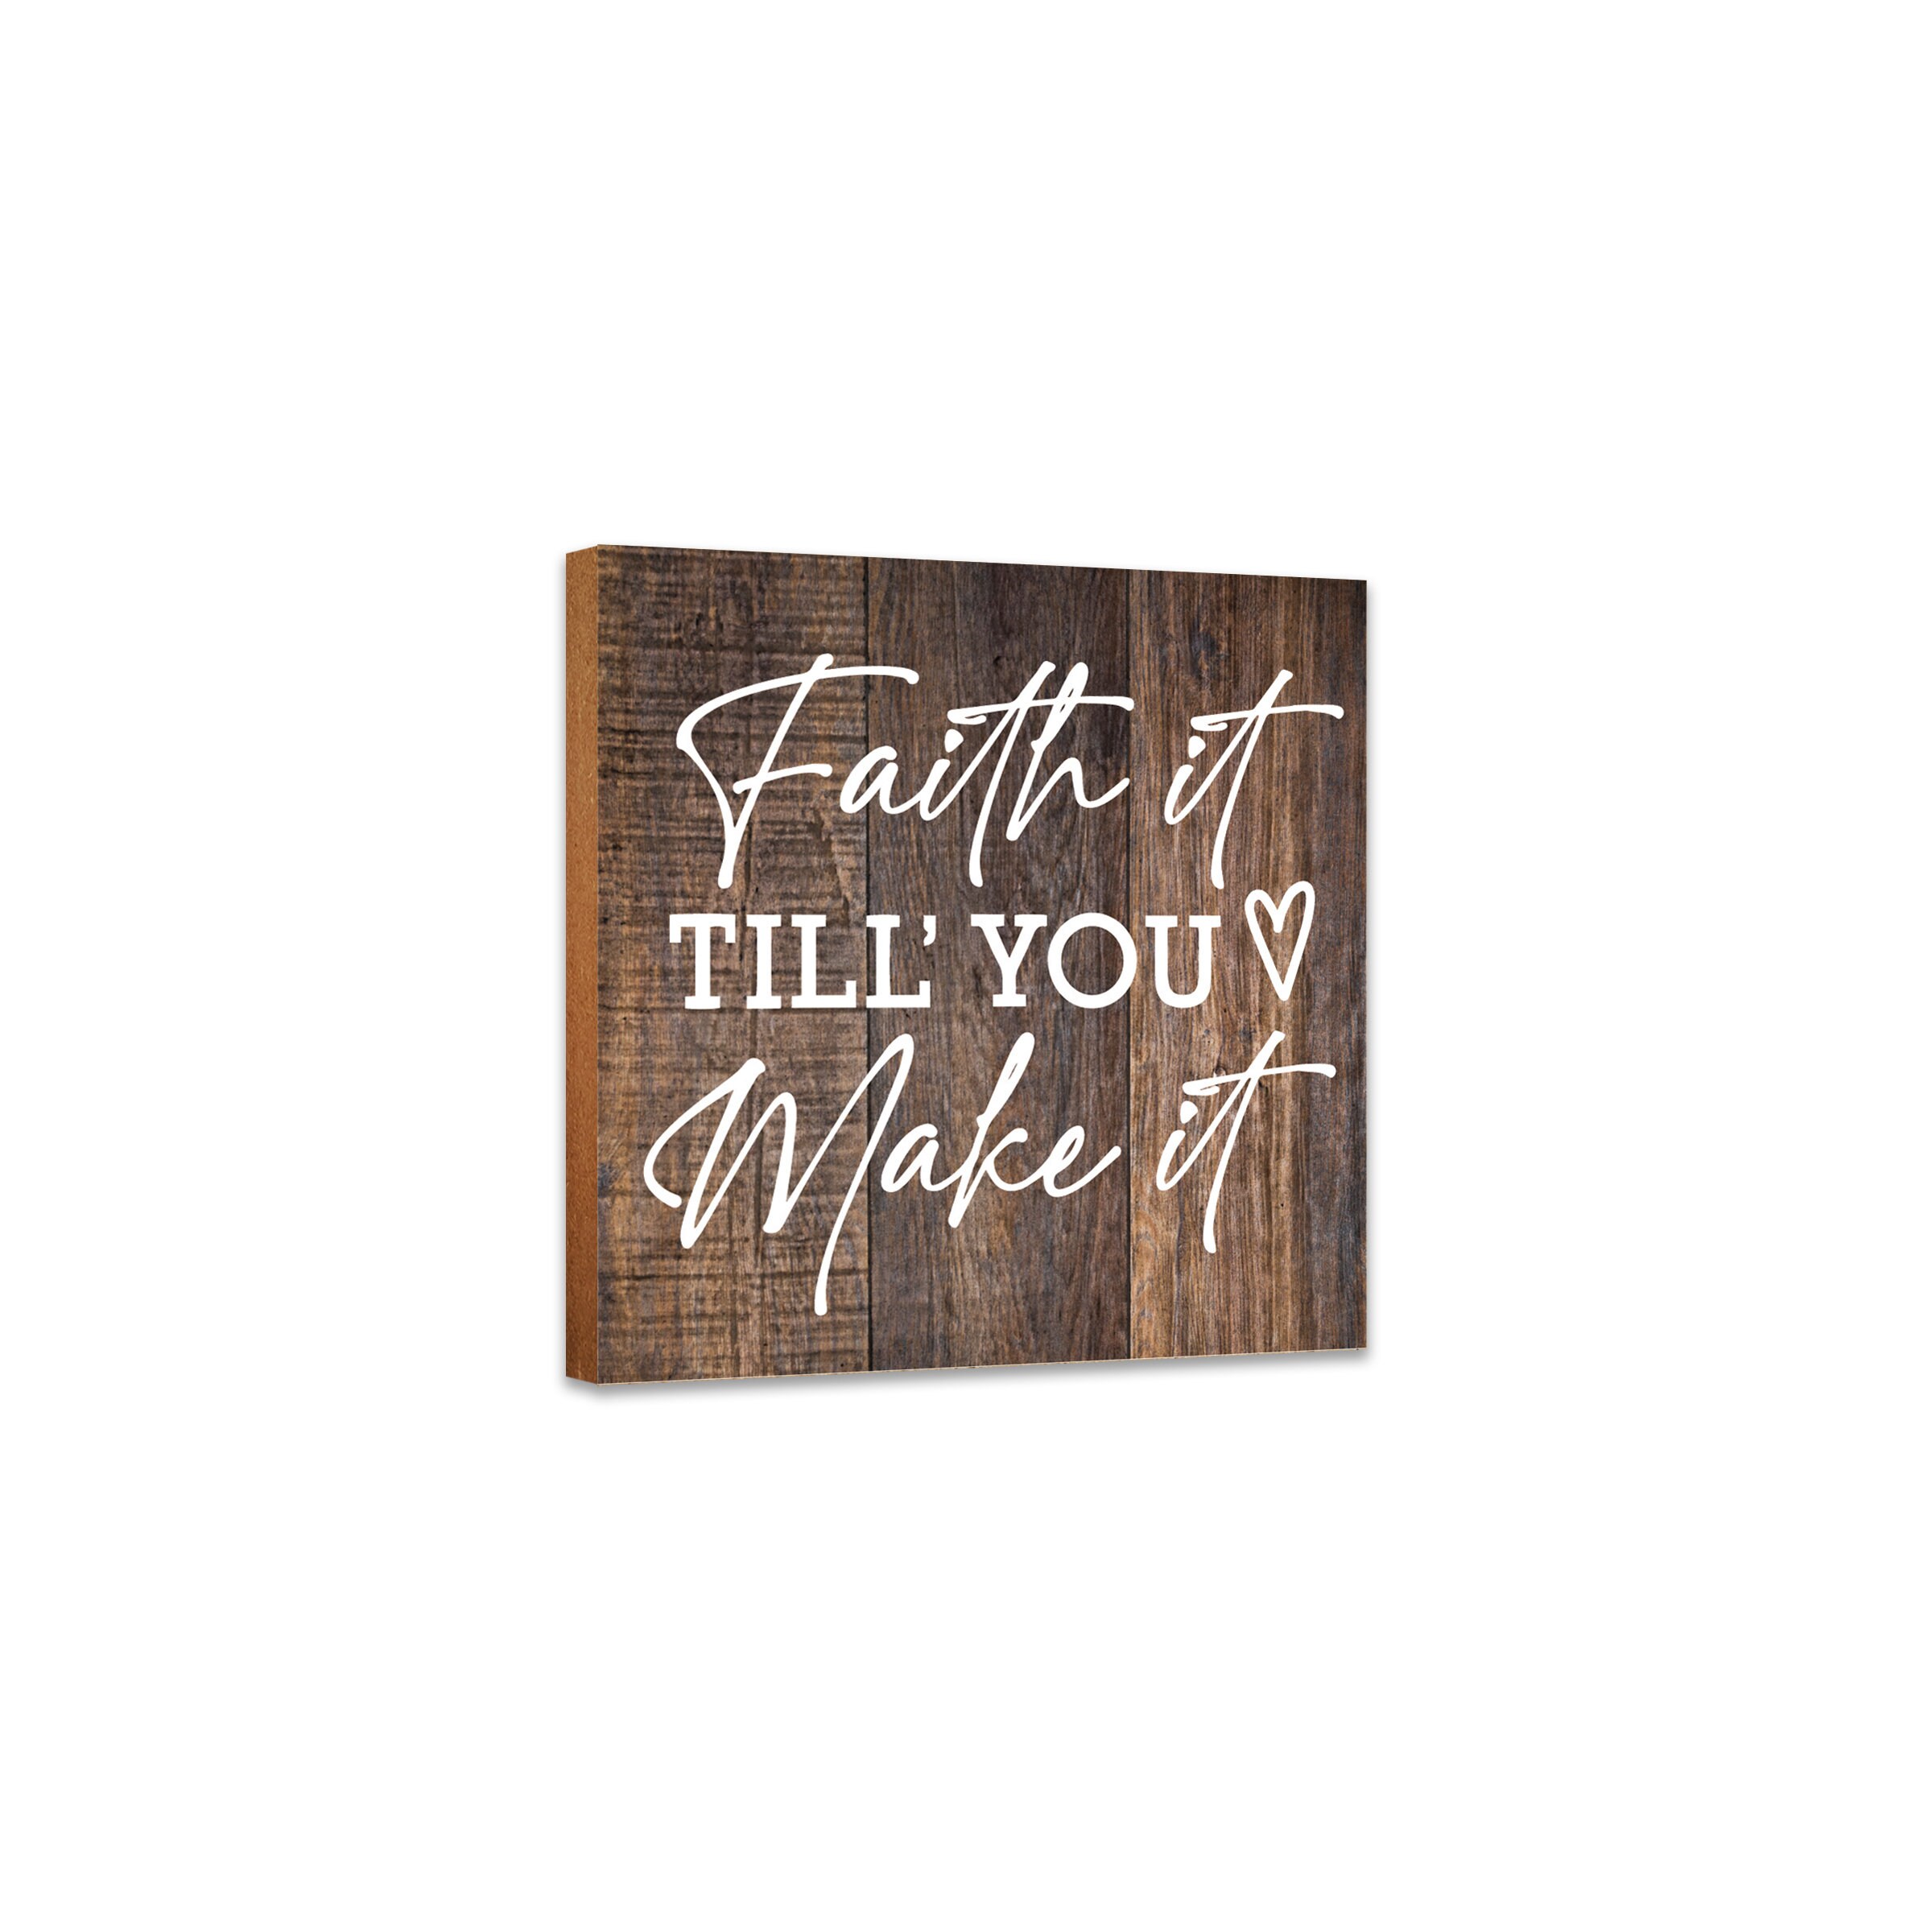 Christian Quote Isaiah 6:8 Postcard for Sale by walk-by-faith